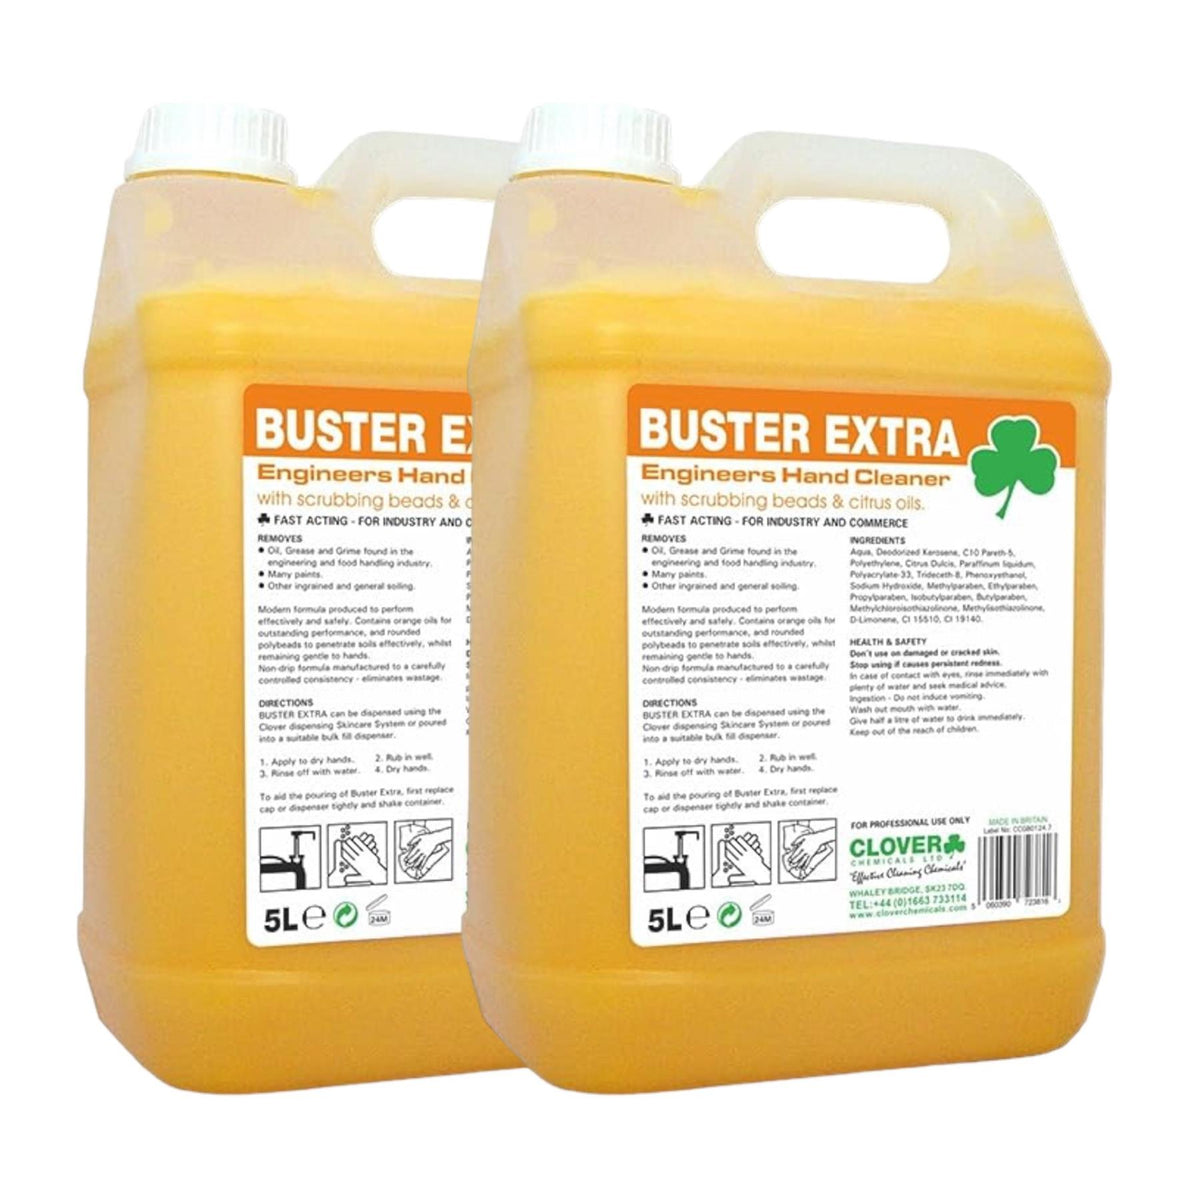 Clover Buster Extra Engineers Hand Cleaner 10 Litre